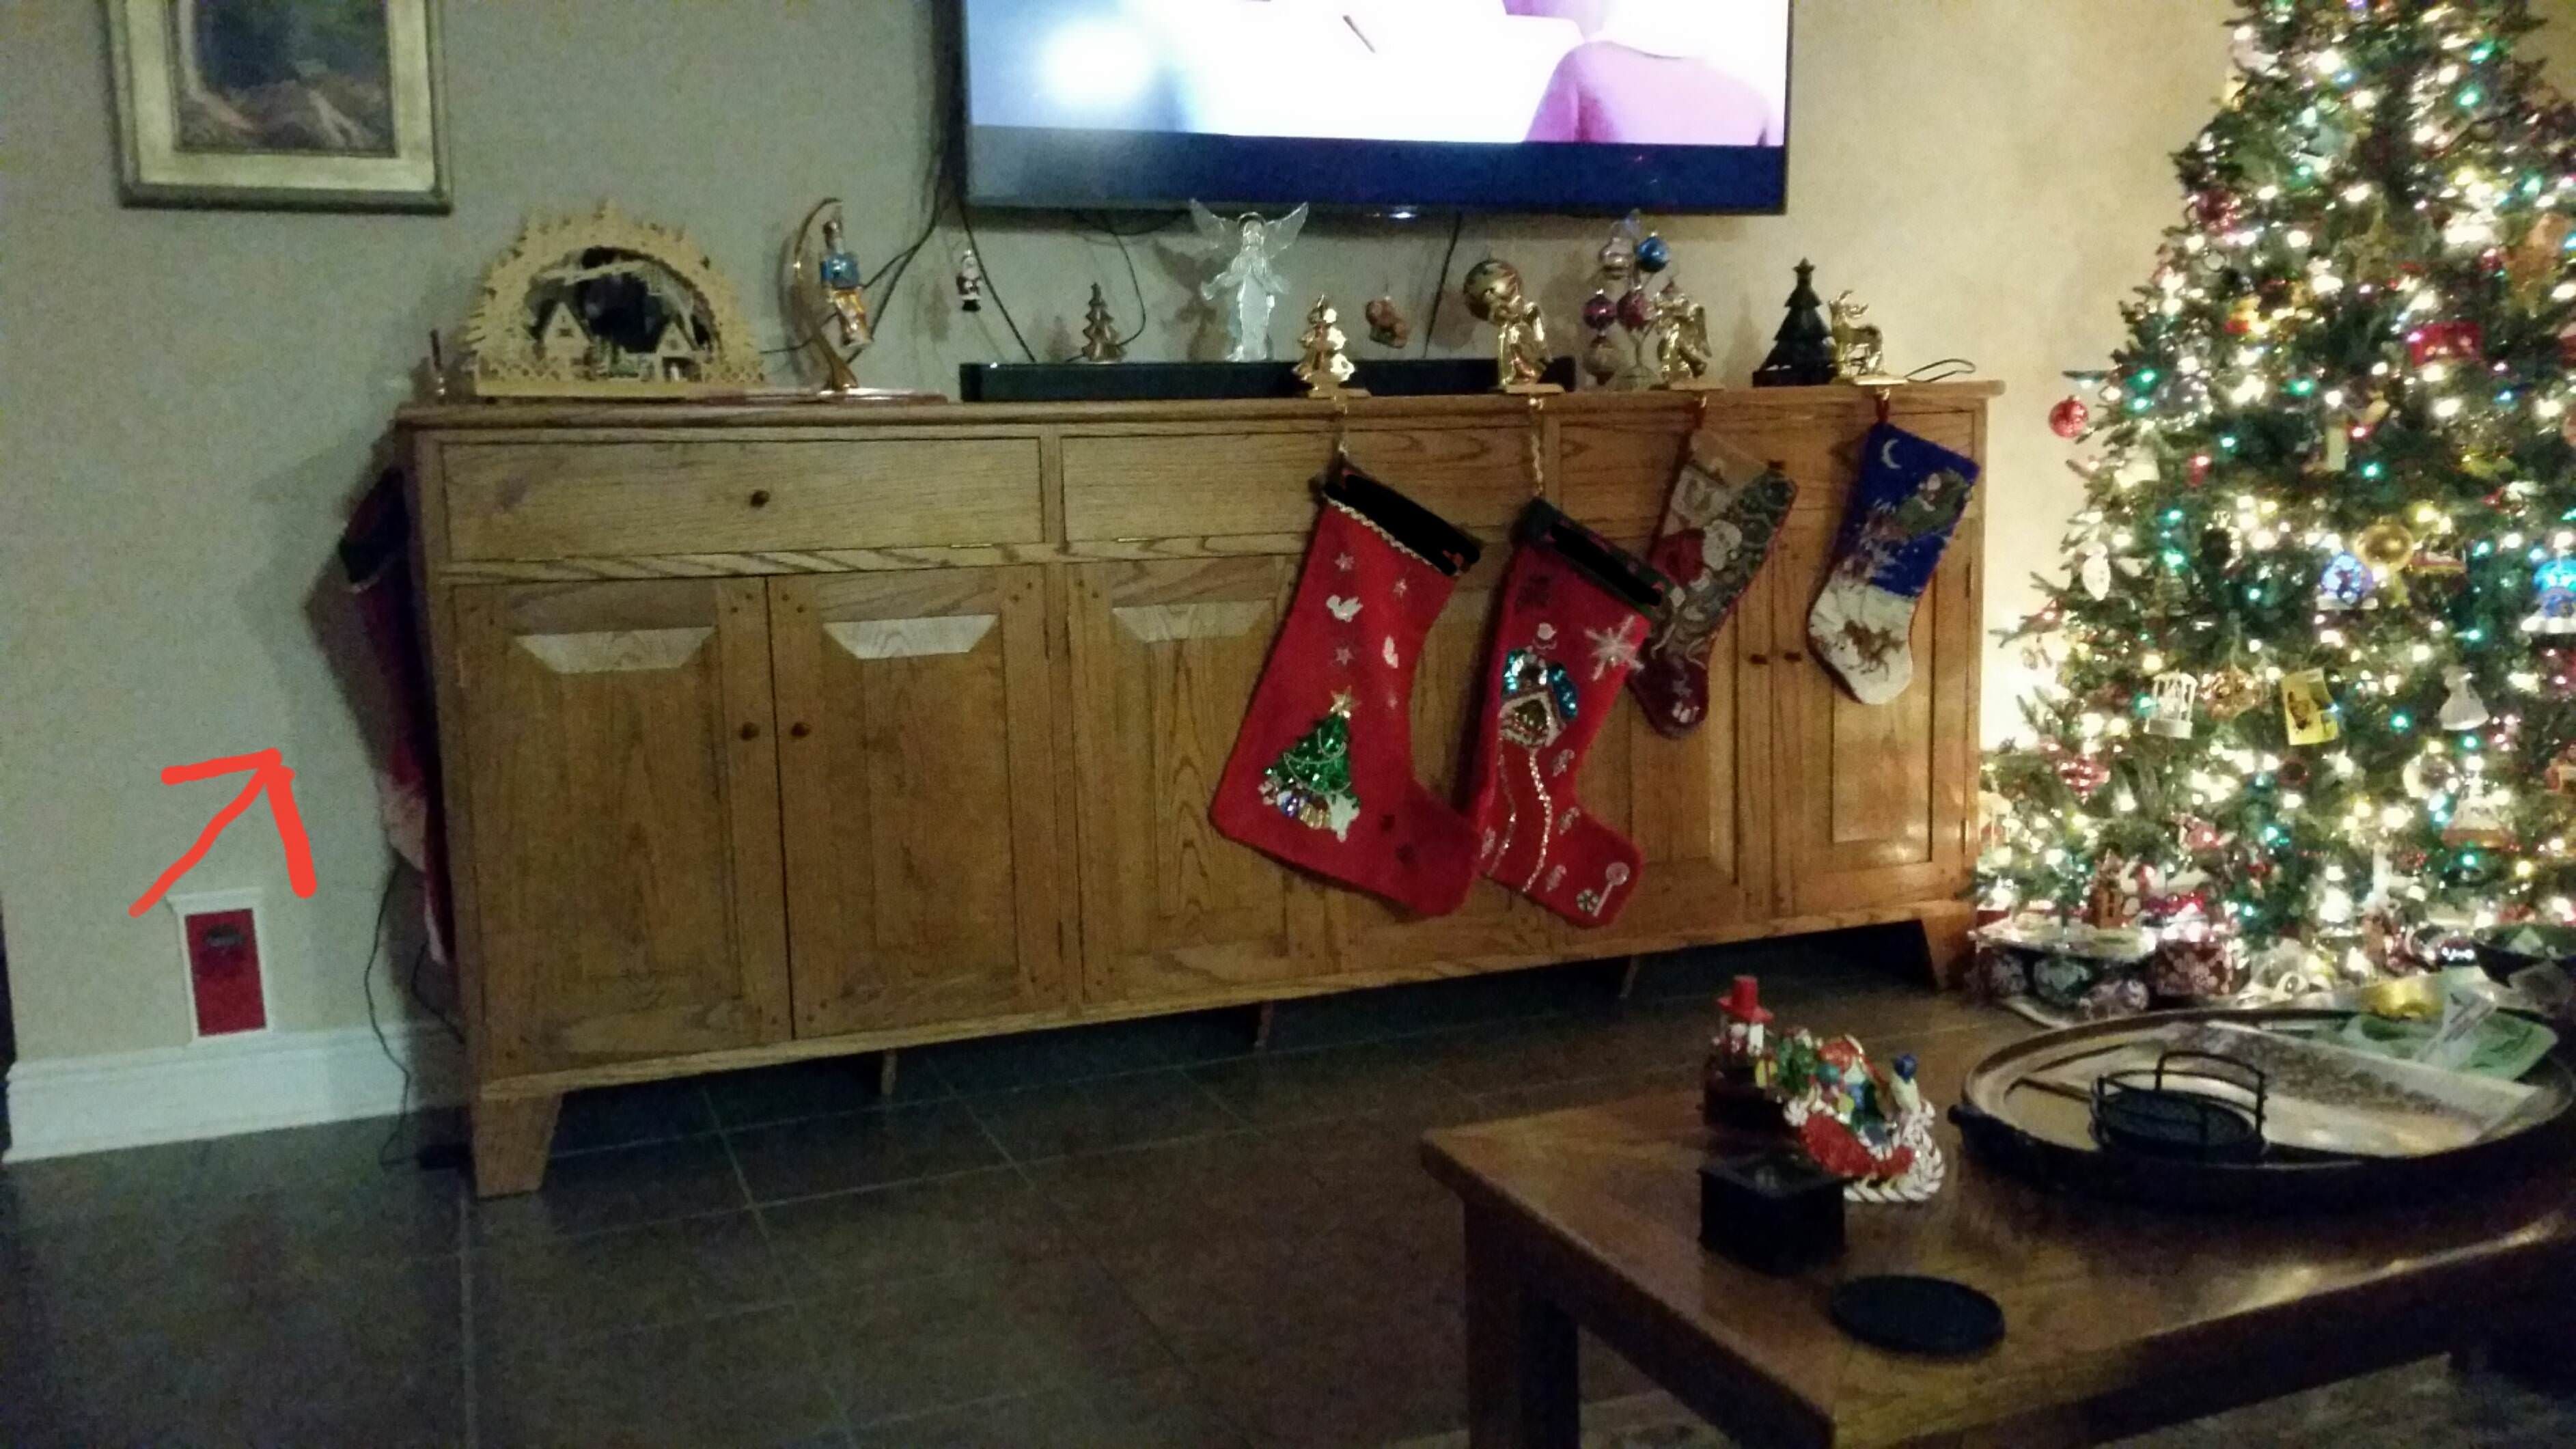 Another reason why I'm not sure my in laws like me. My stocking is not only separate from theirs, it is on the other side of the furniture.